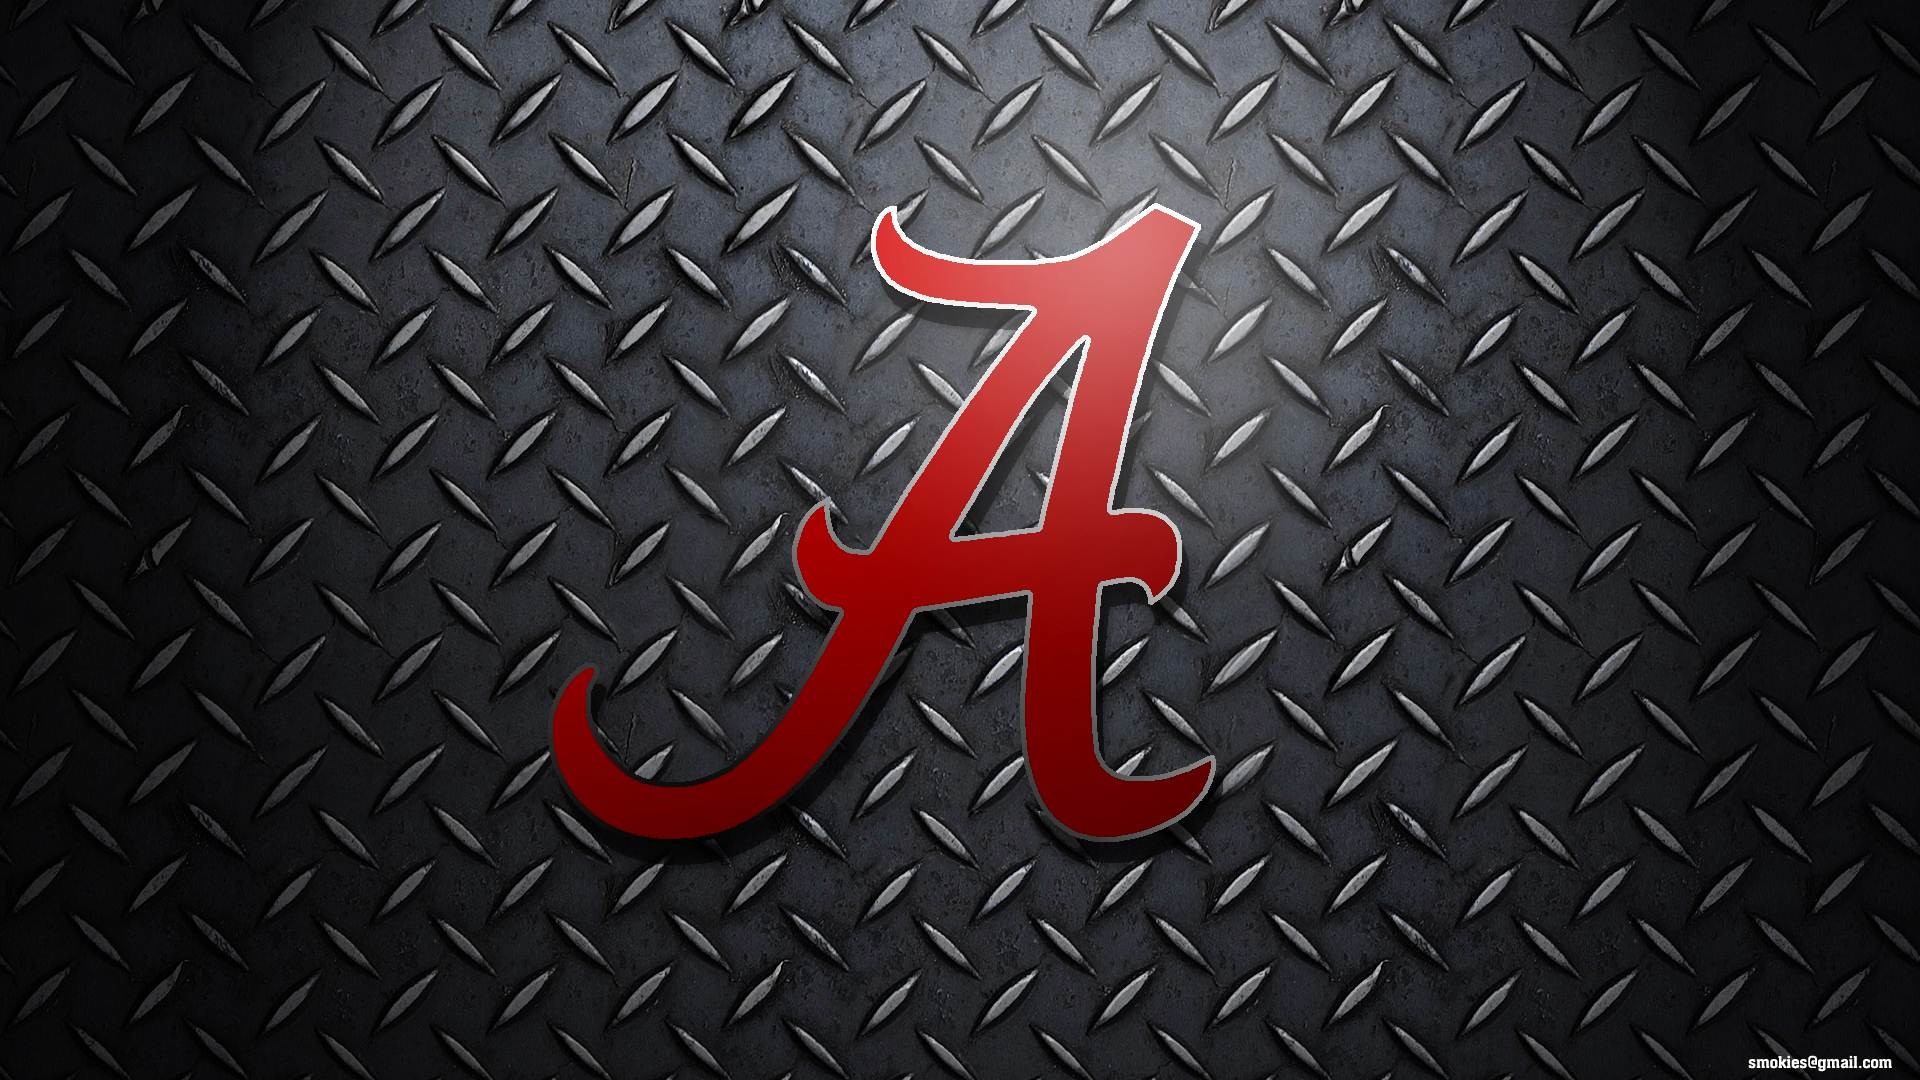 1920x1080 Free Alabama Wallpaper Photography Auctions for | HD Wallpapers | Pinterest  | Alabama football pictures and Wallpaper